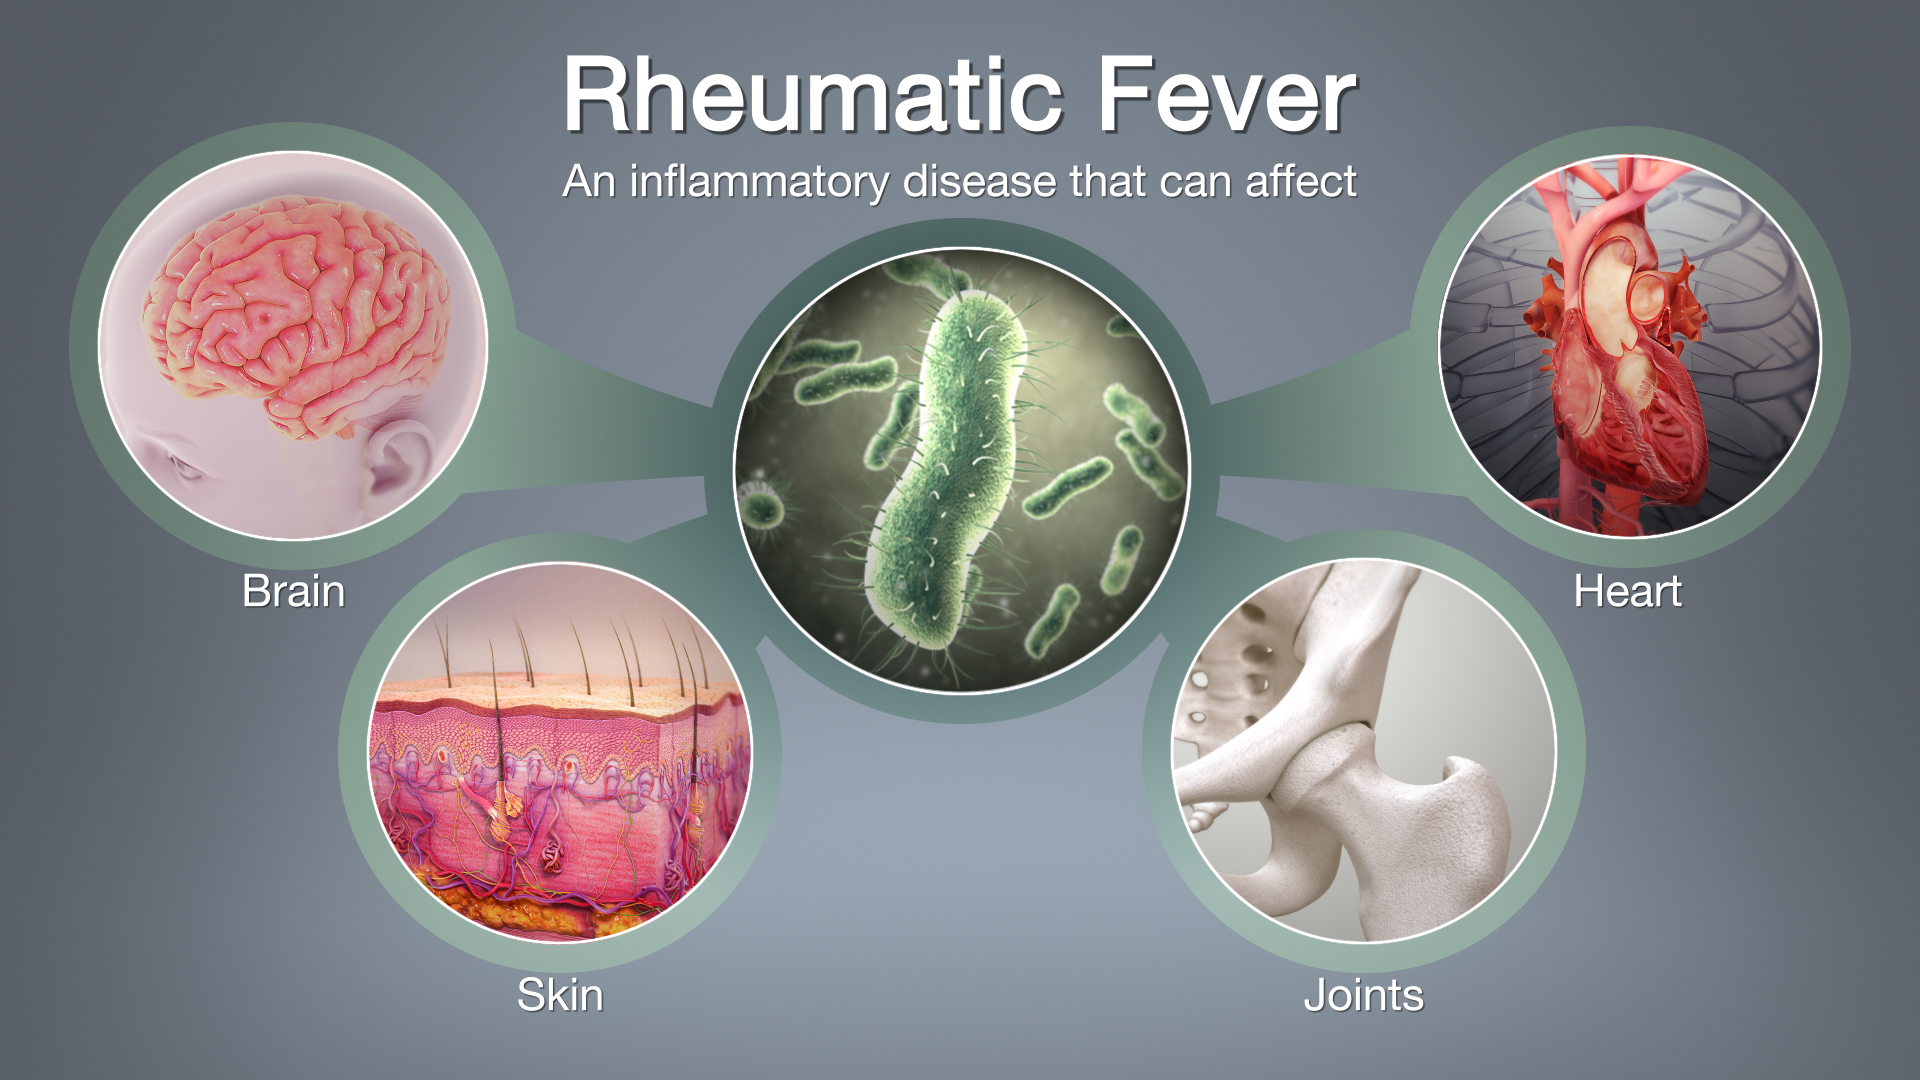 Rheumatic Fever: Symptoms, Causes, and Treatment - Scientific Animations